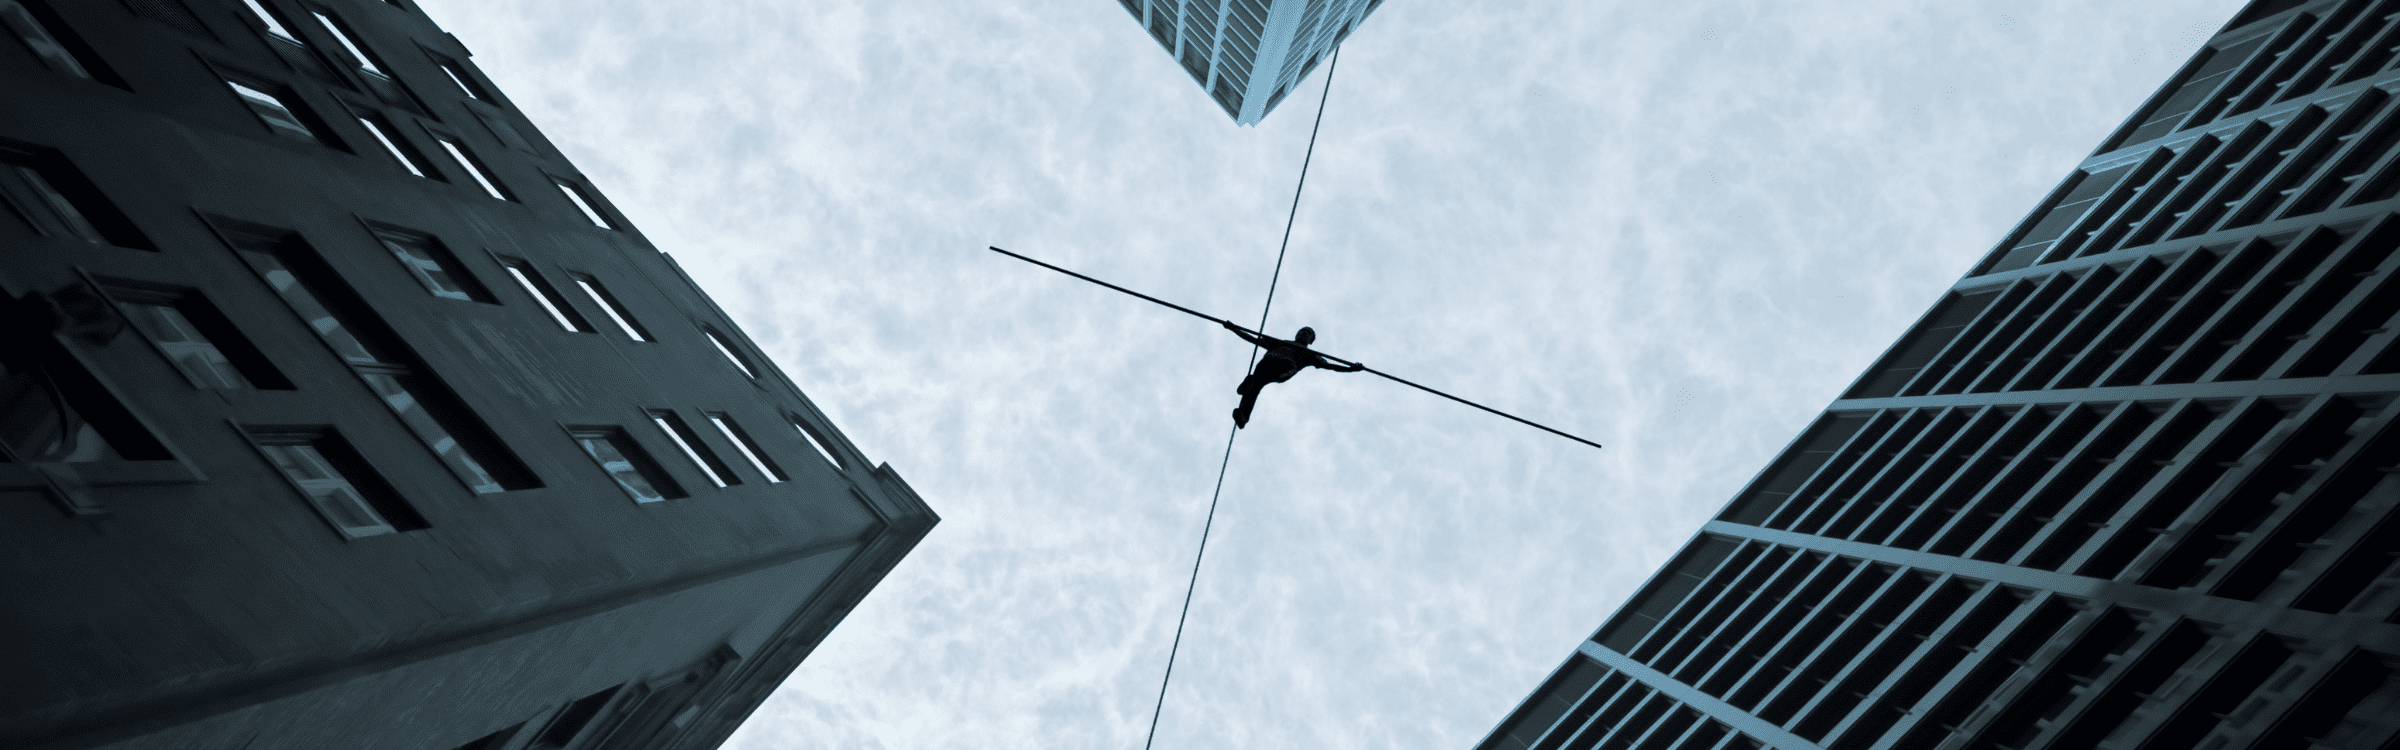 Compliance tightrope